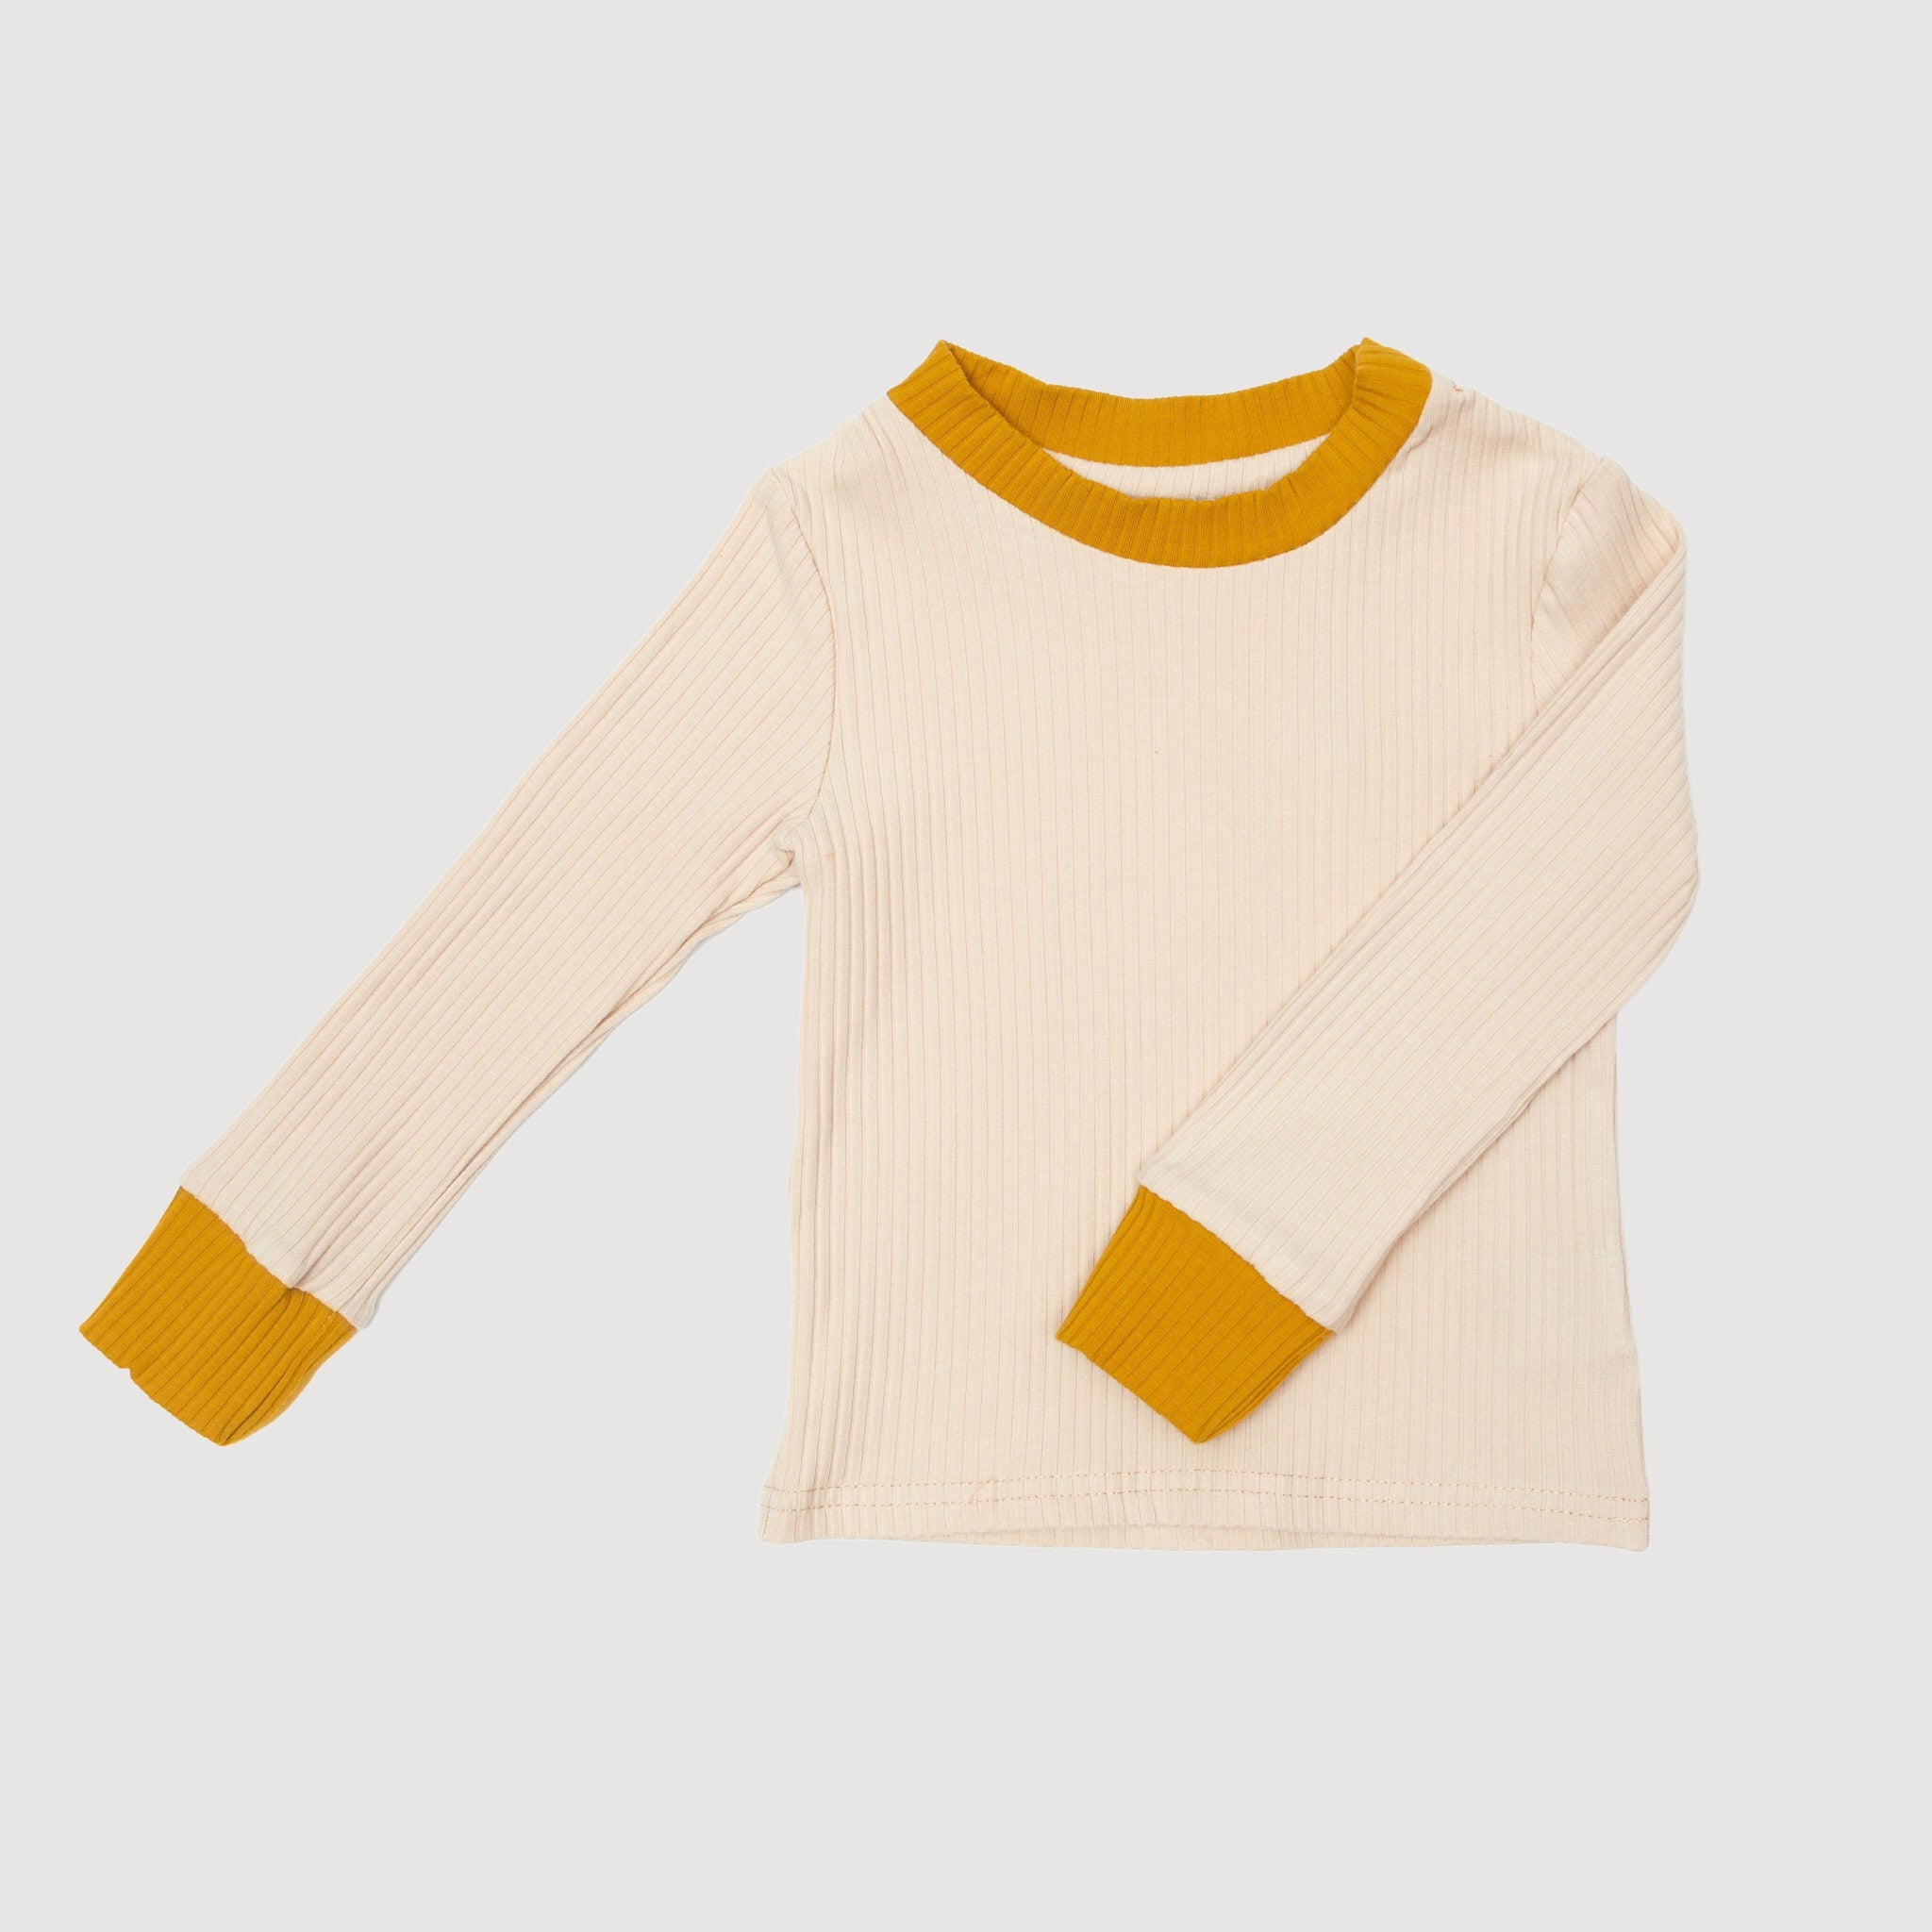 Cuffed Long Sleeve Top - Oatmeal with Gold Binds bel & bow